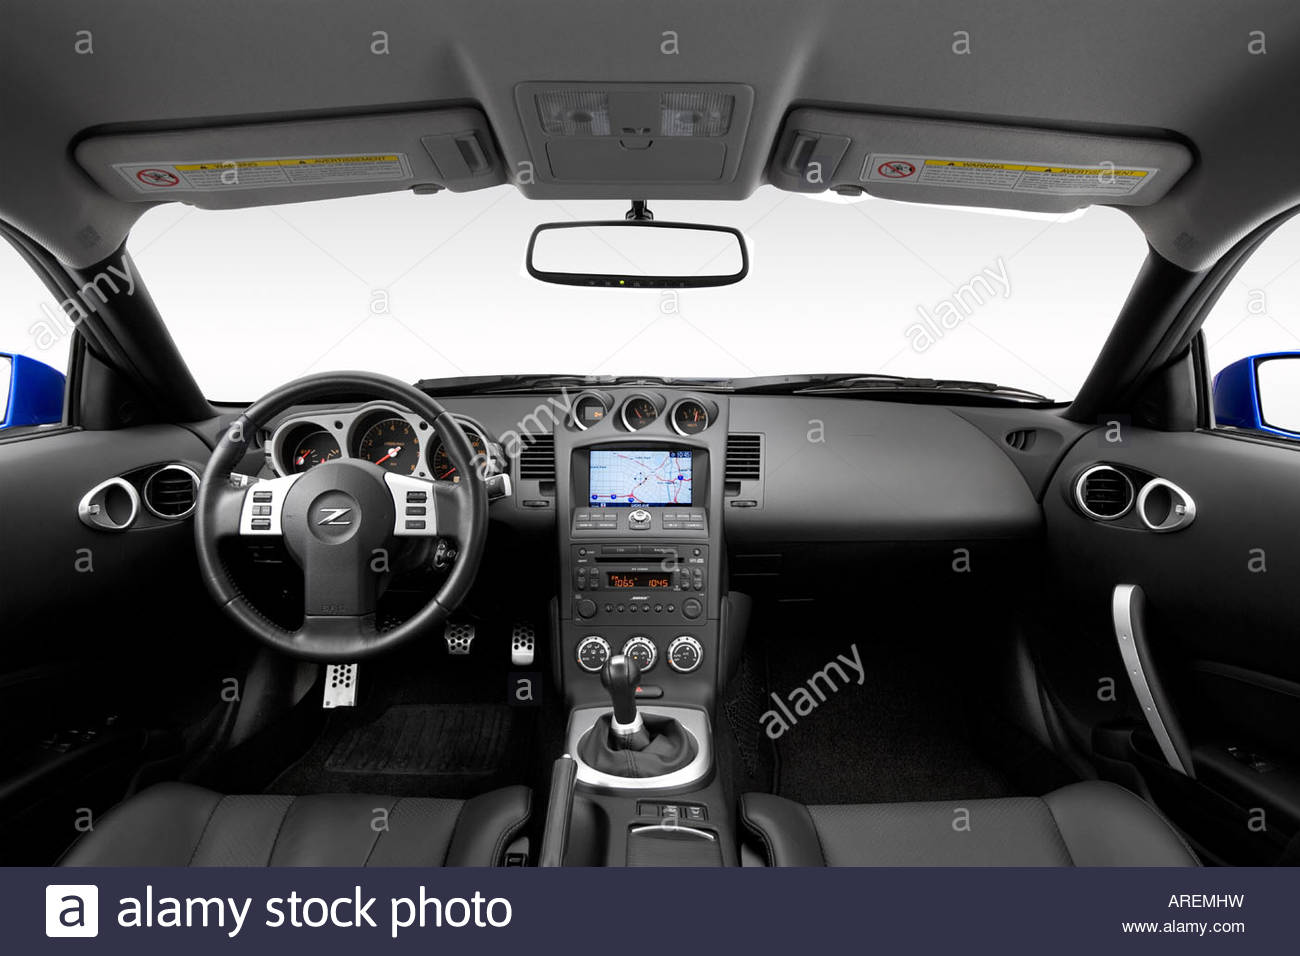 2006-nissan-350z-grand-touring-in-blue-dashboard-center-console-gear-AREMHW.jpg